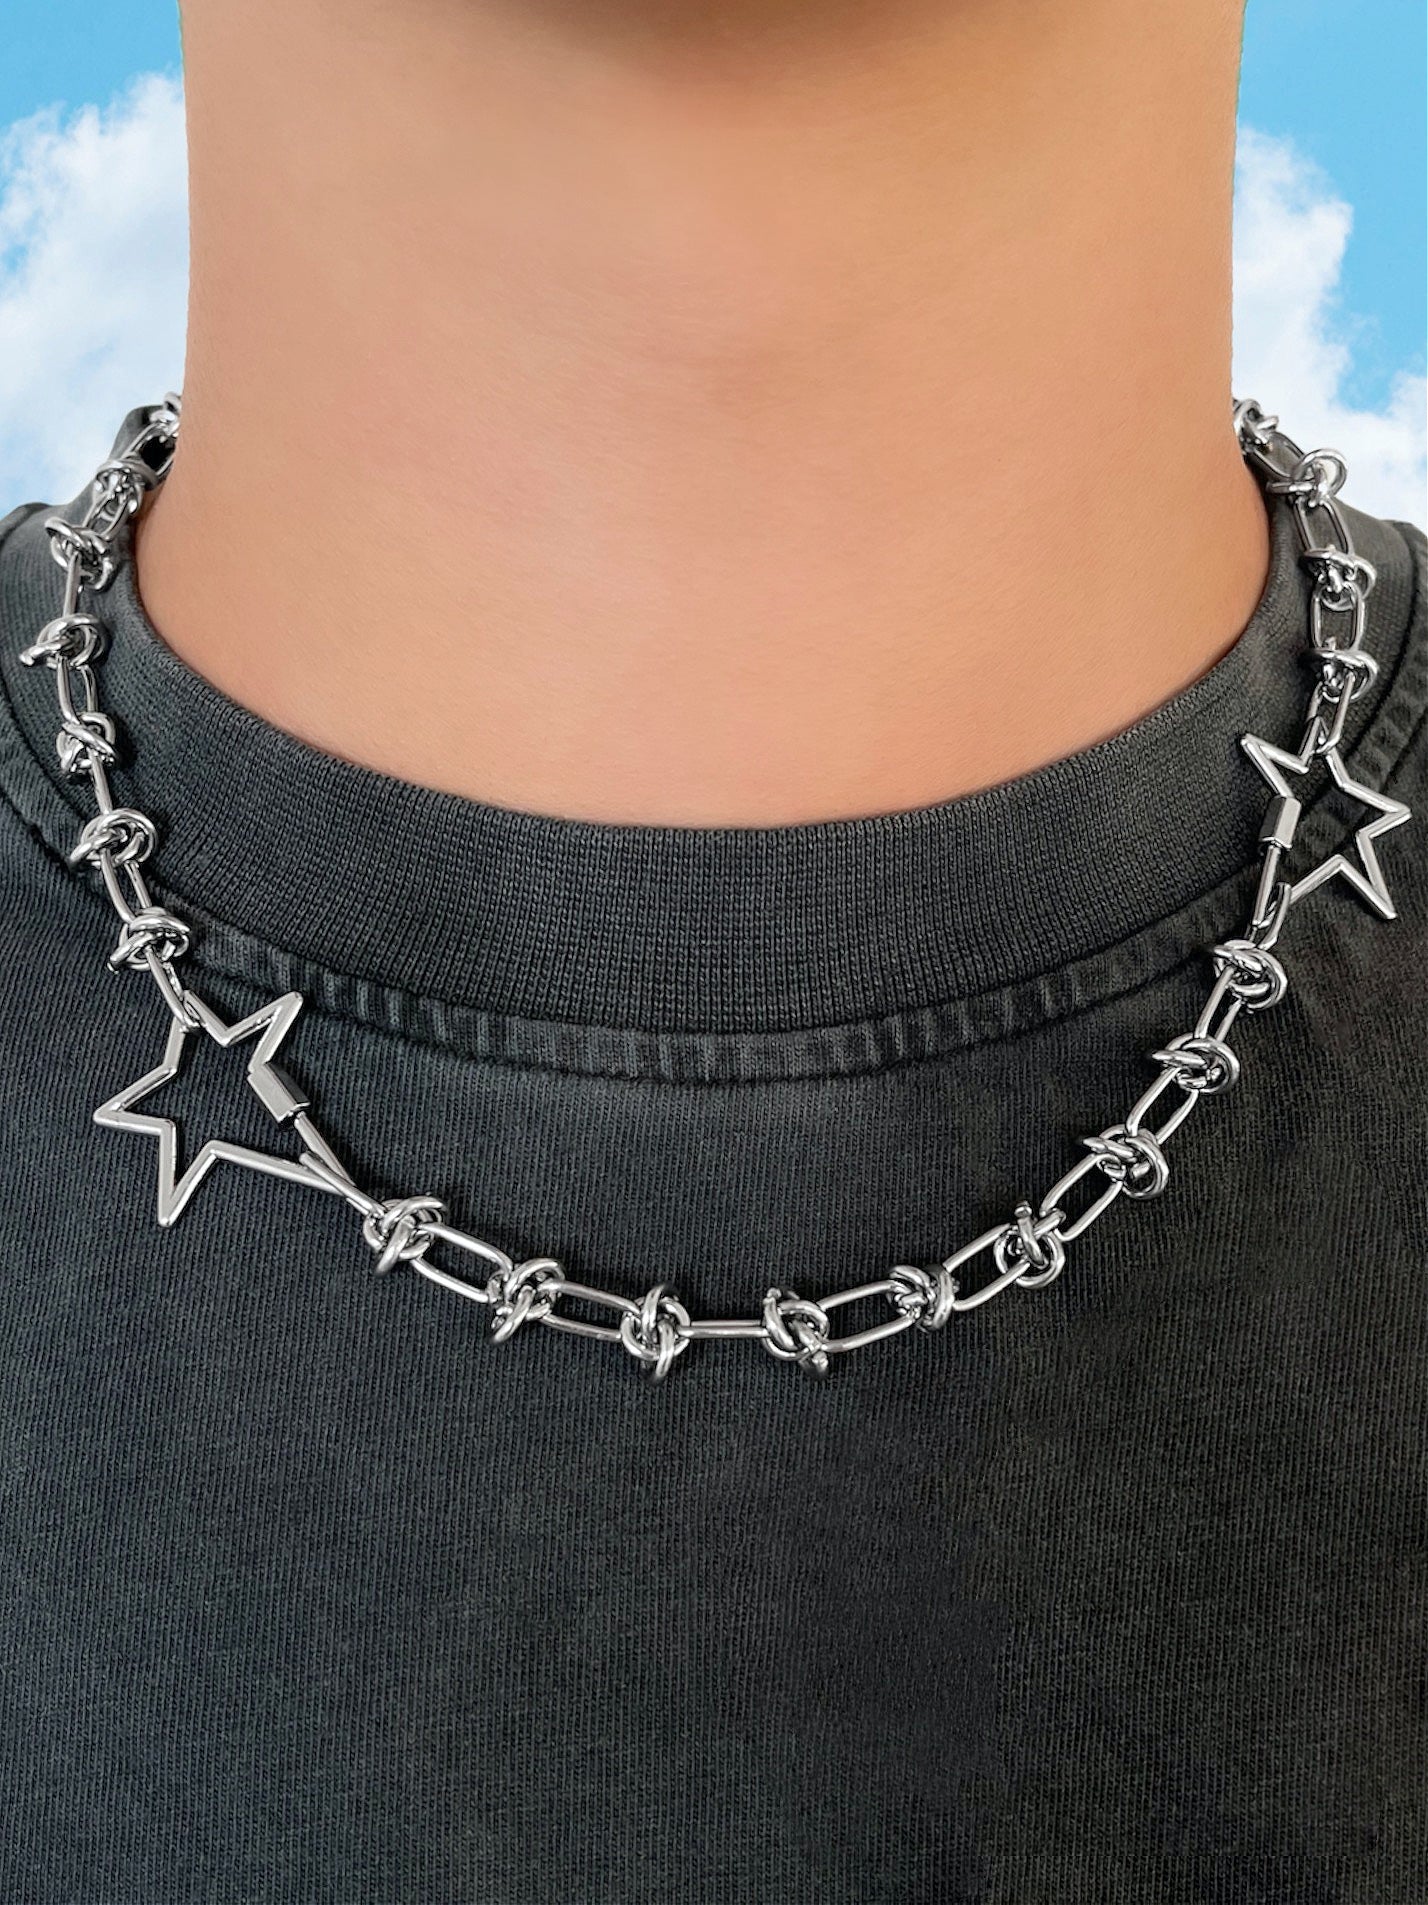 CELESTIAL BARBED WIRE CHAIN NECKLACE